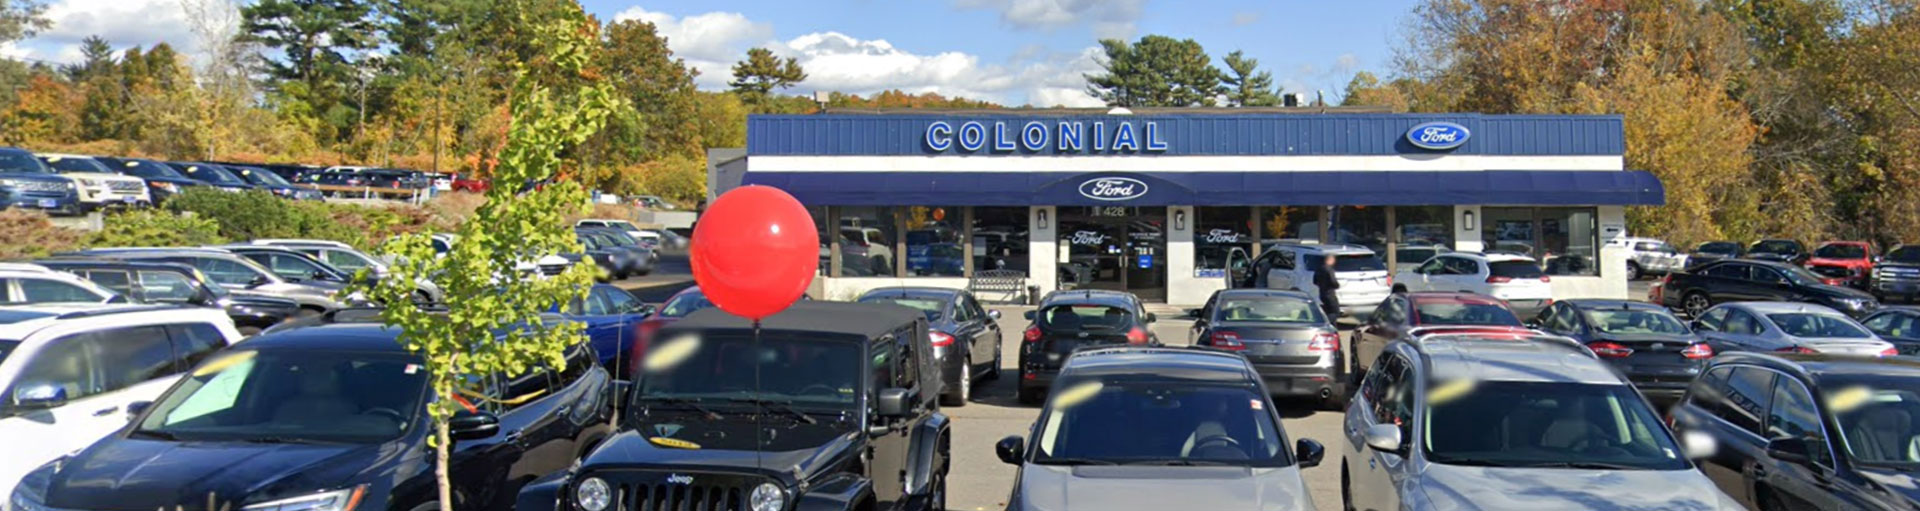 Colonial Ford of Marlboro Alignment Services